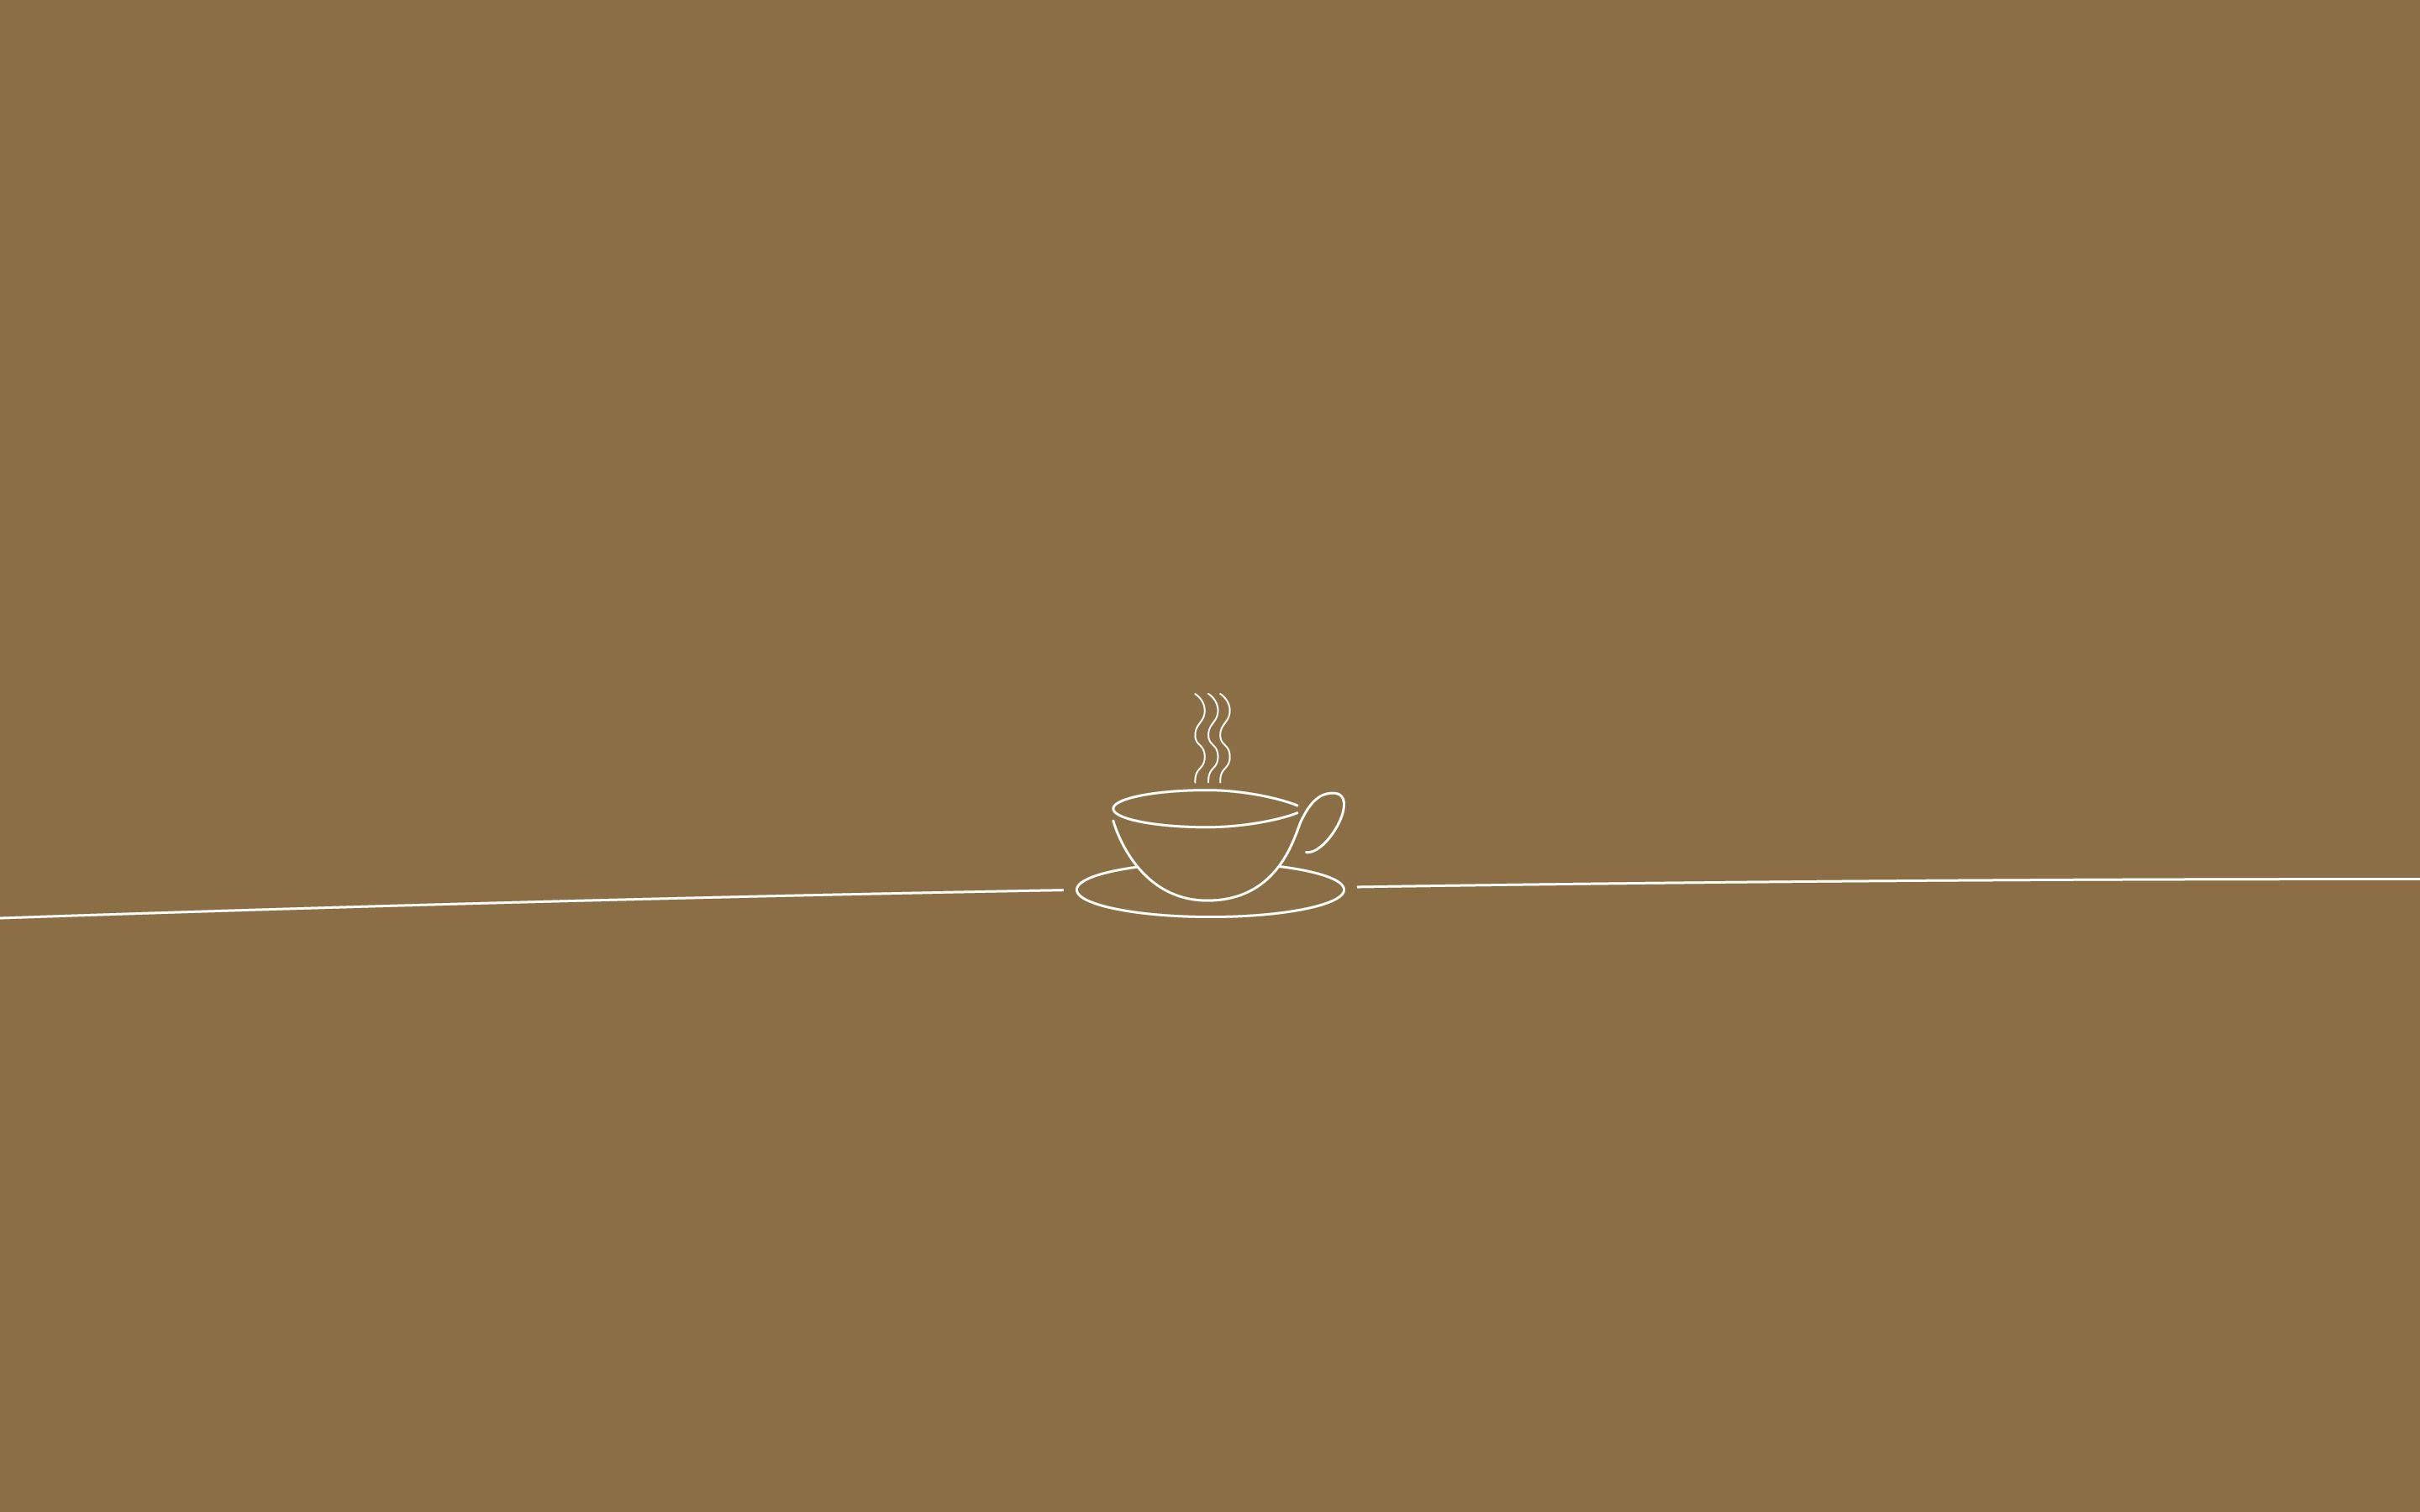 A cup of coffee on a brown background - Brown